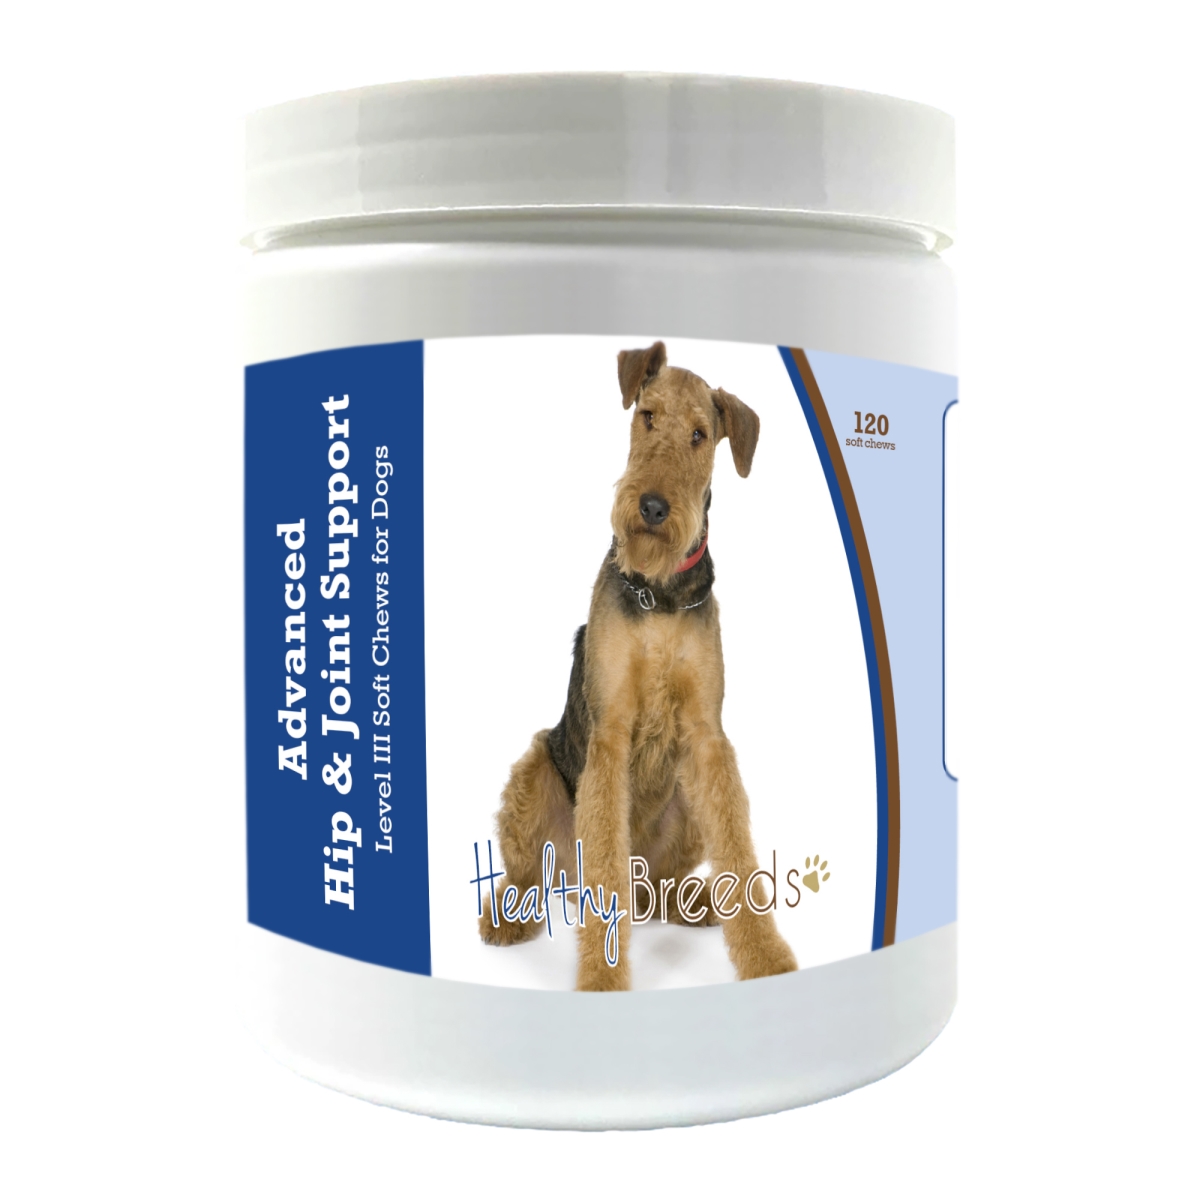 Picture of Healthy Breeds 192959897425 Airedale Terrier Advanced Hip & Joint Support Level III Soft Chews for Dogs